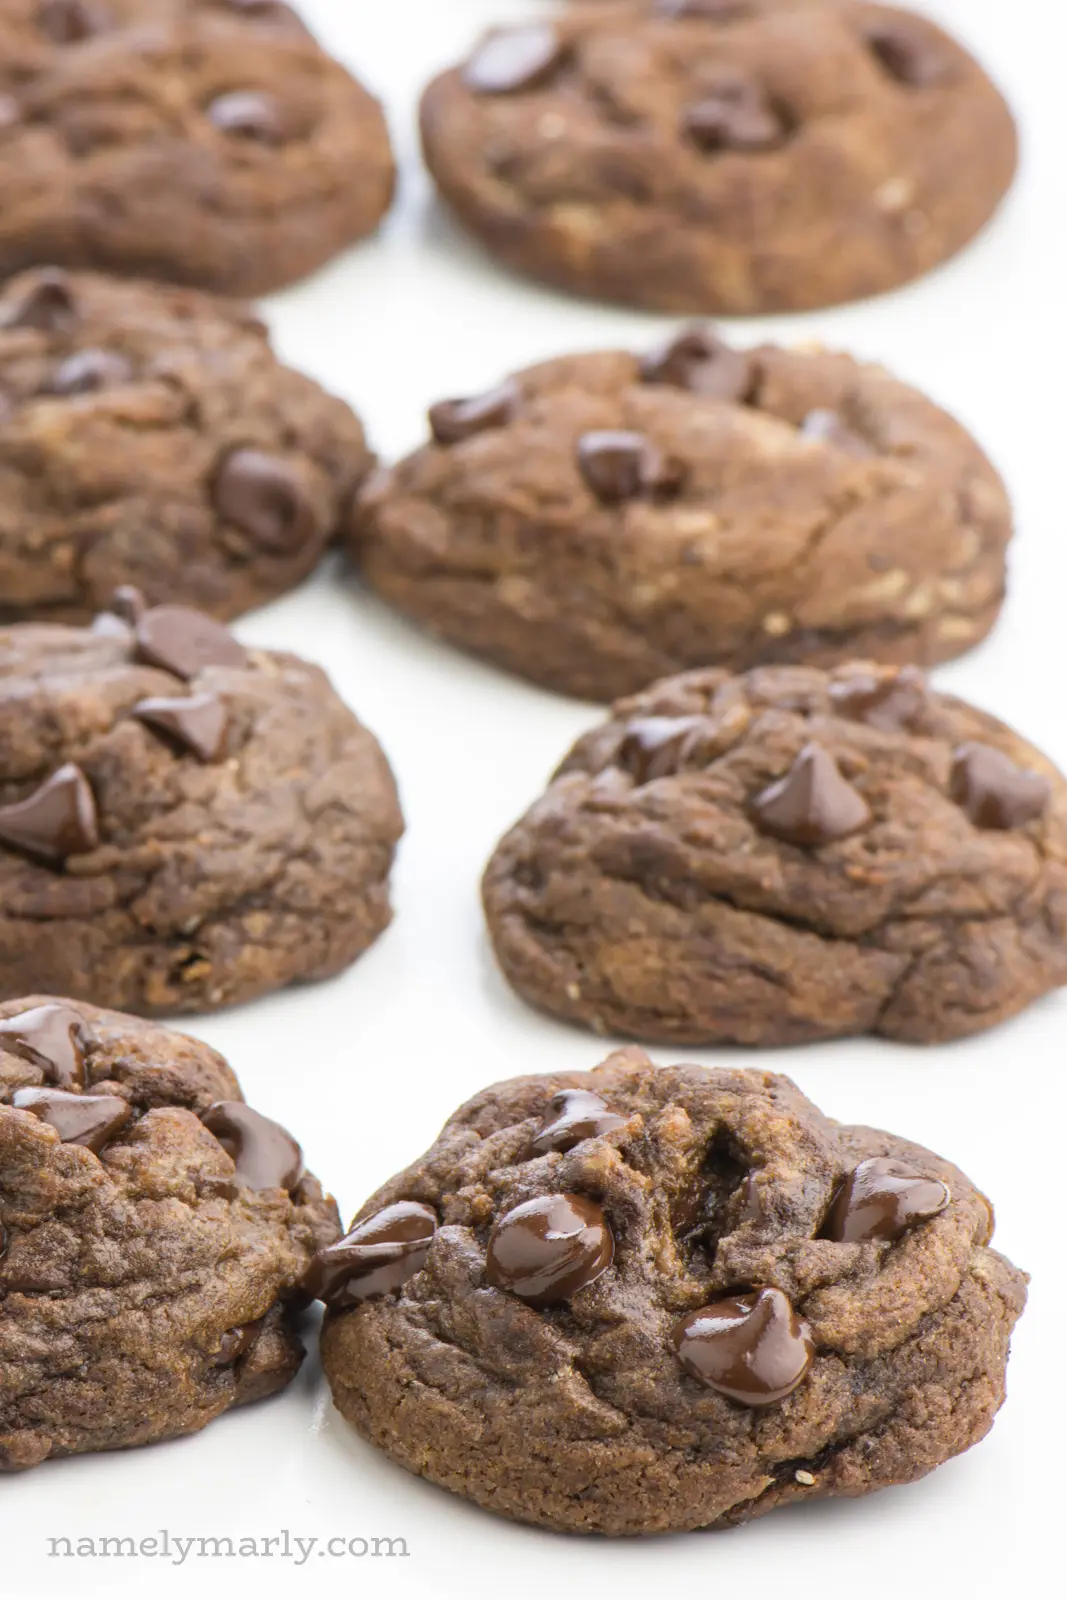 Eight chocolate chocolate chip cookies are lined in rows of four on a white countertop.